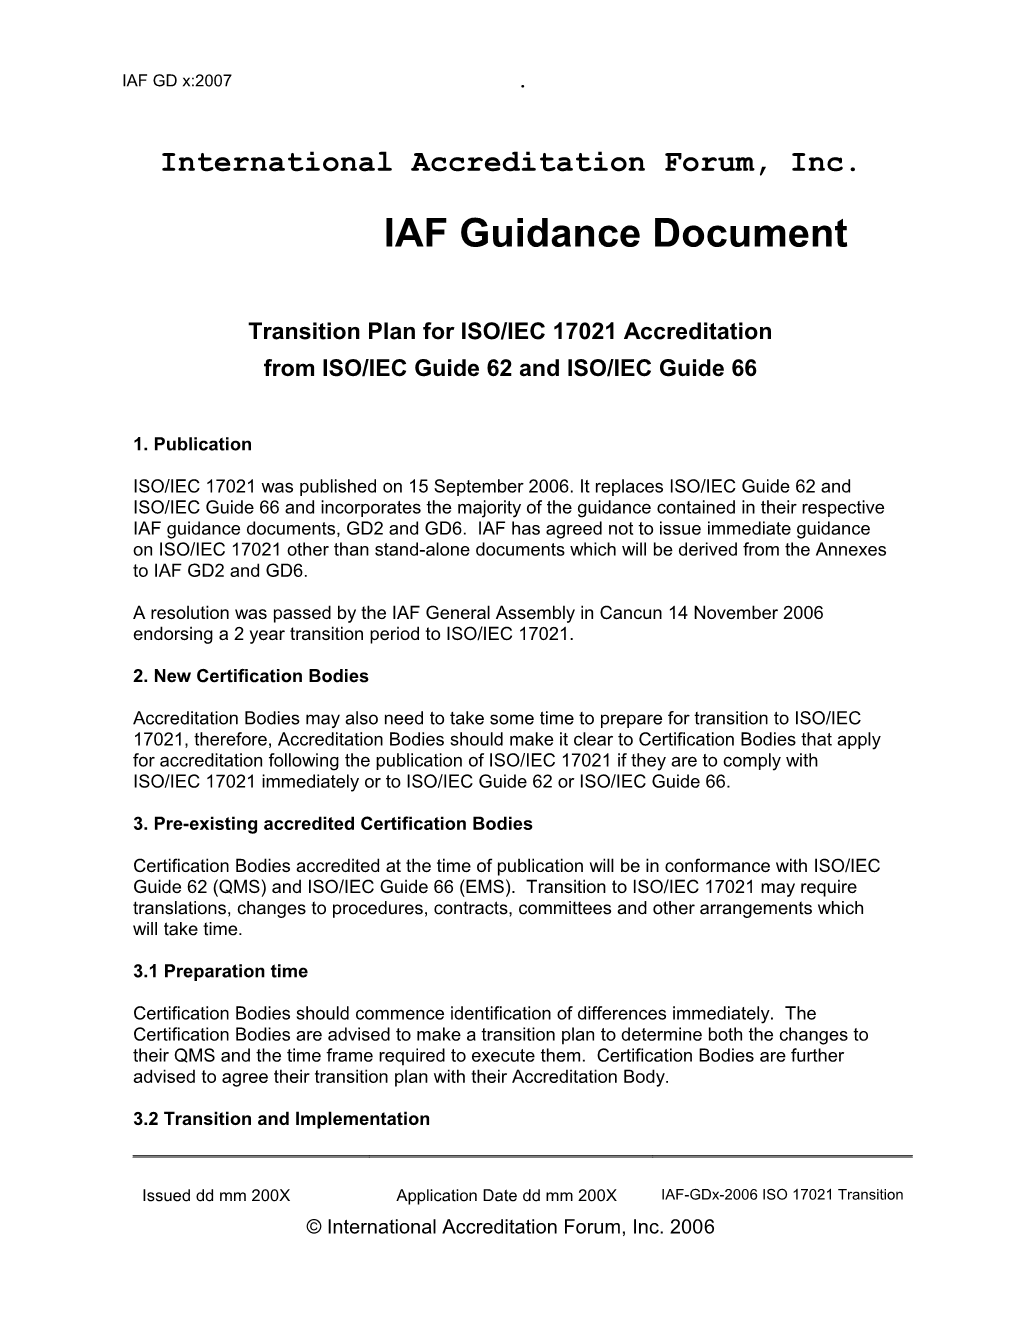 IAF Transition Plan for ISO 17021 Accreditation